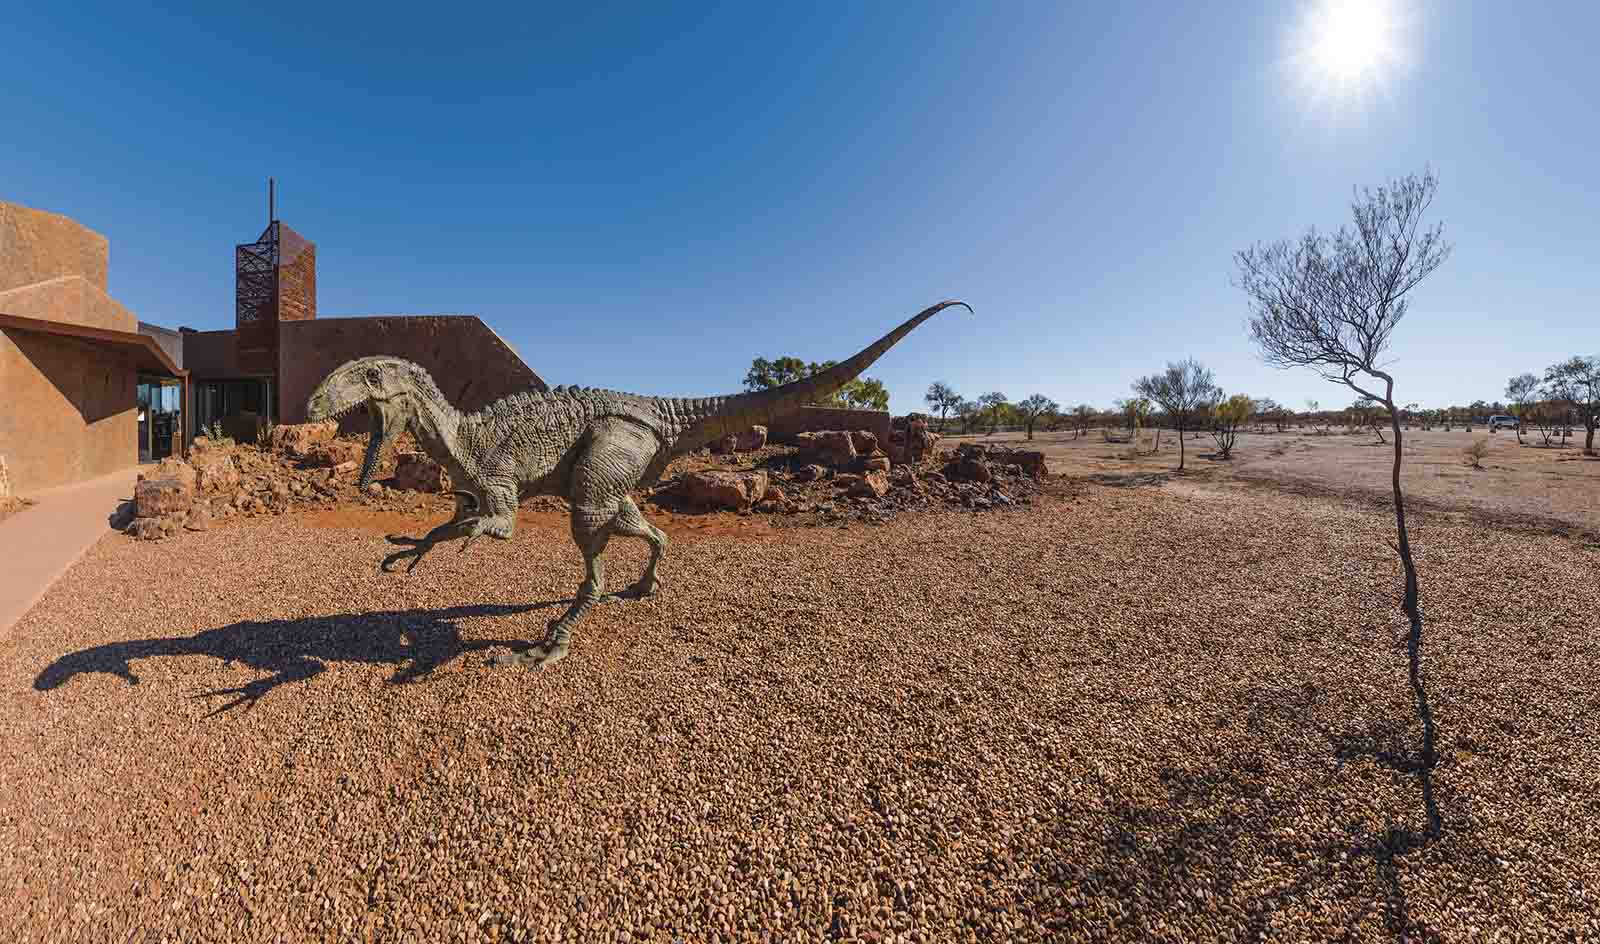 Follow the dinosaur trail in Winton, Outback Queensland | Epic outback guide